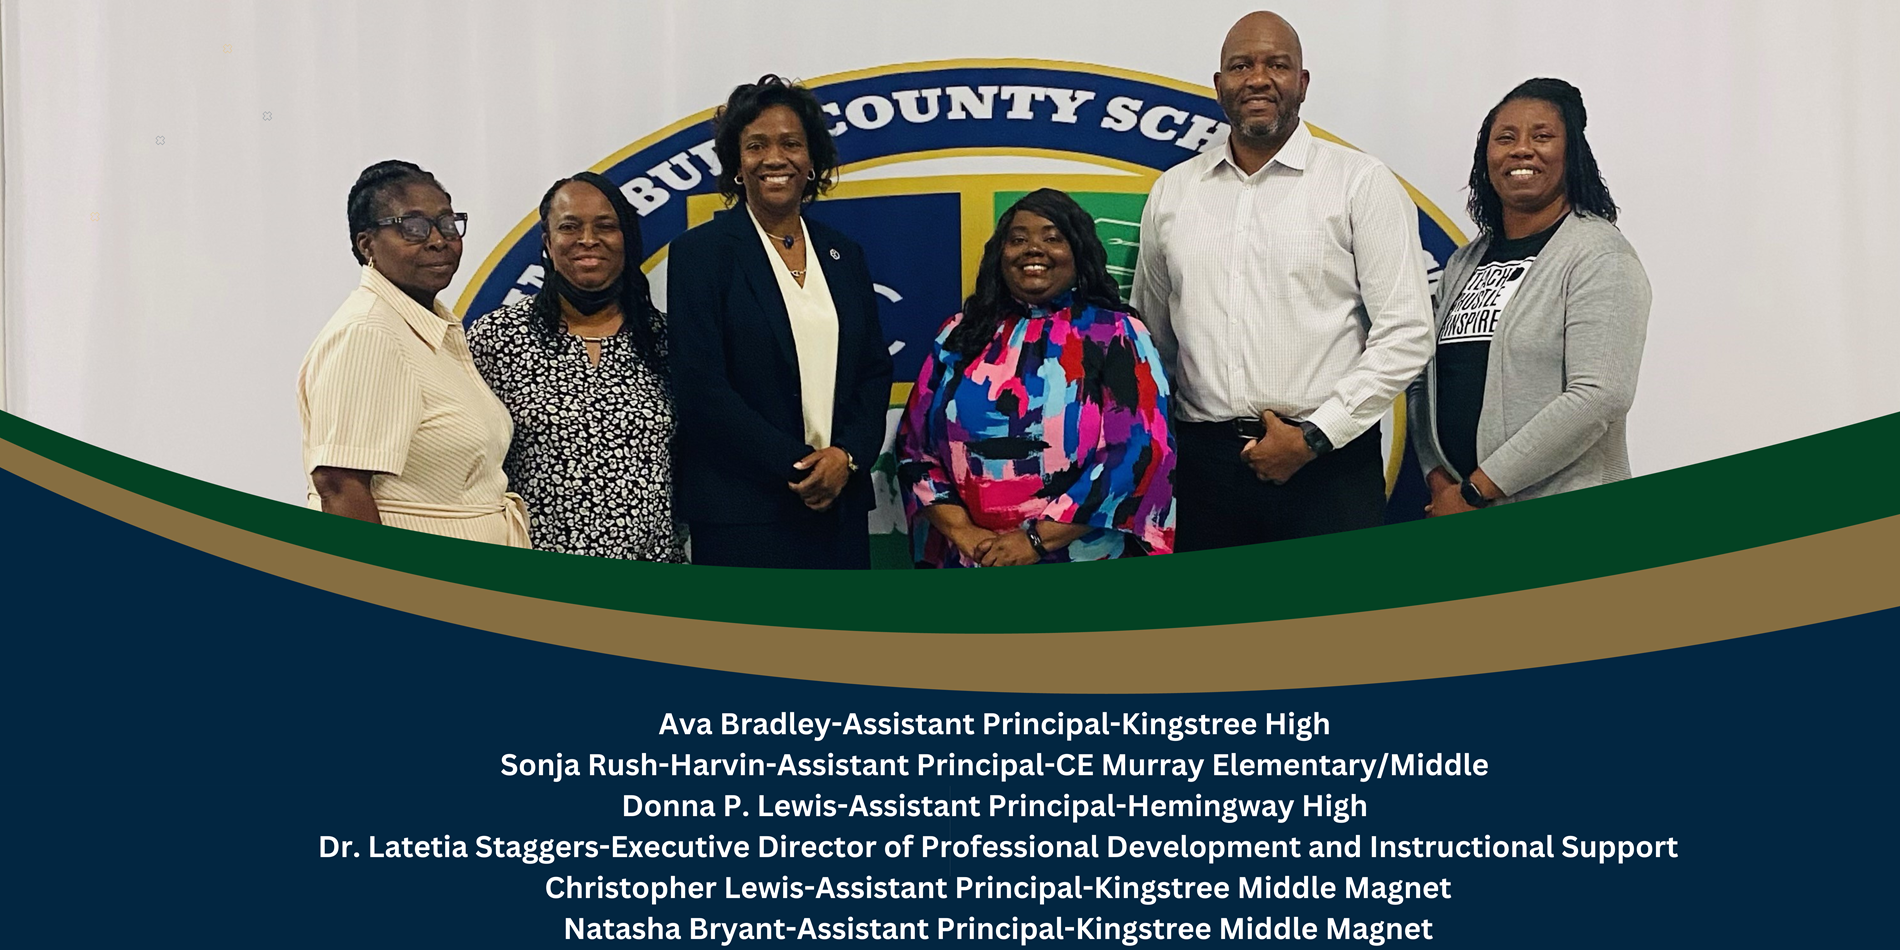 Ava Bradley-Assistant Principal-Kingstree High. Sonja Rush-Harvin-Assistant Principal-CE Murray Elementary/Middle, Donna P. Lewis-Assistant Principal-Hemingway High. Dr. Latetia Staggers-Executive Director of Professional Development and Instructional Support. Christopher Lewis-Assistant Principal-Kingstree Middle Magent. Natasha Bryant-Assistant Principal-Kingstree Middle Magnet. 